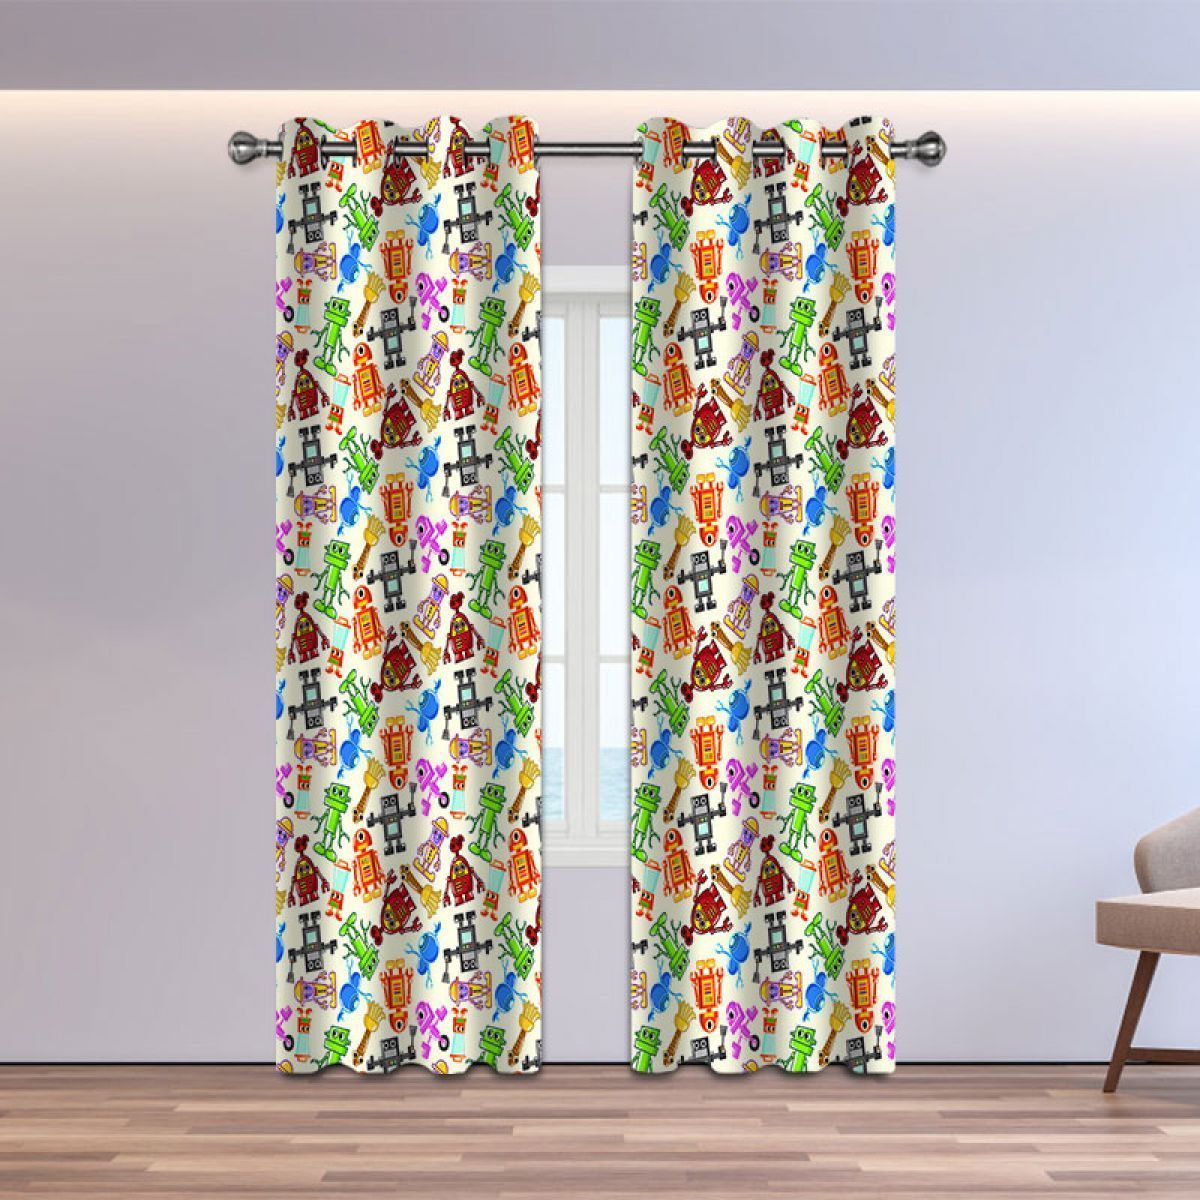 3d colorful robot white background printed window curtain home decor 2437